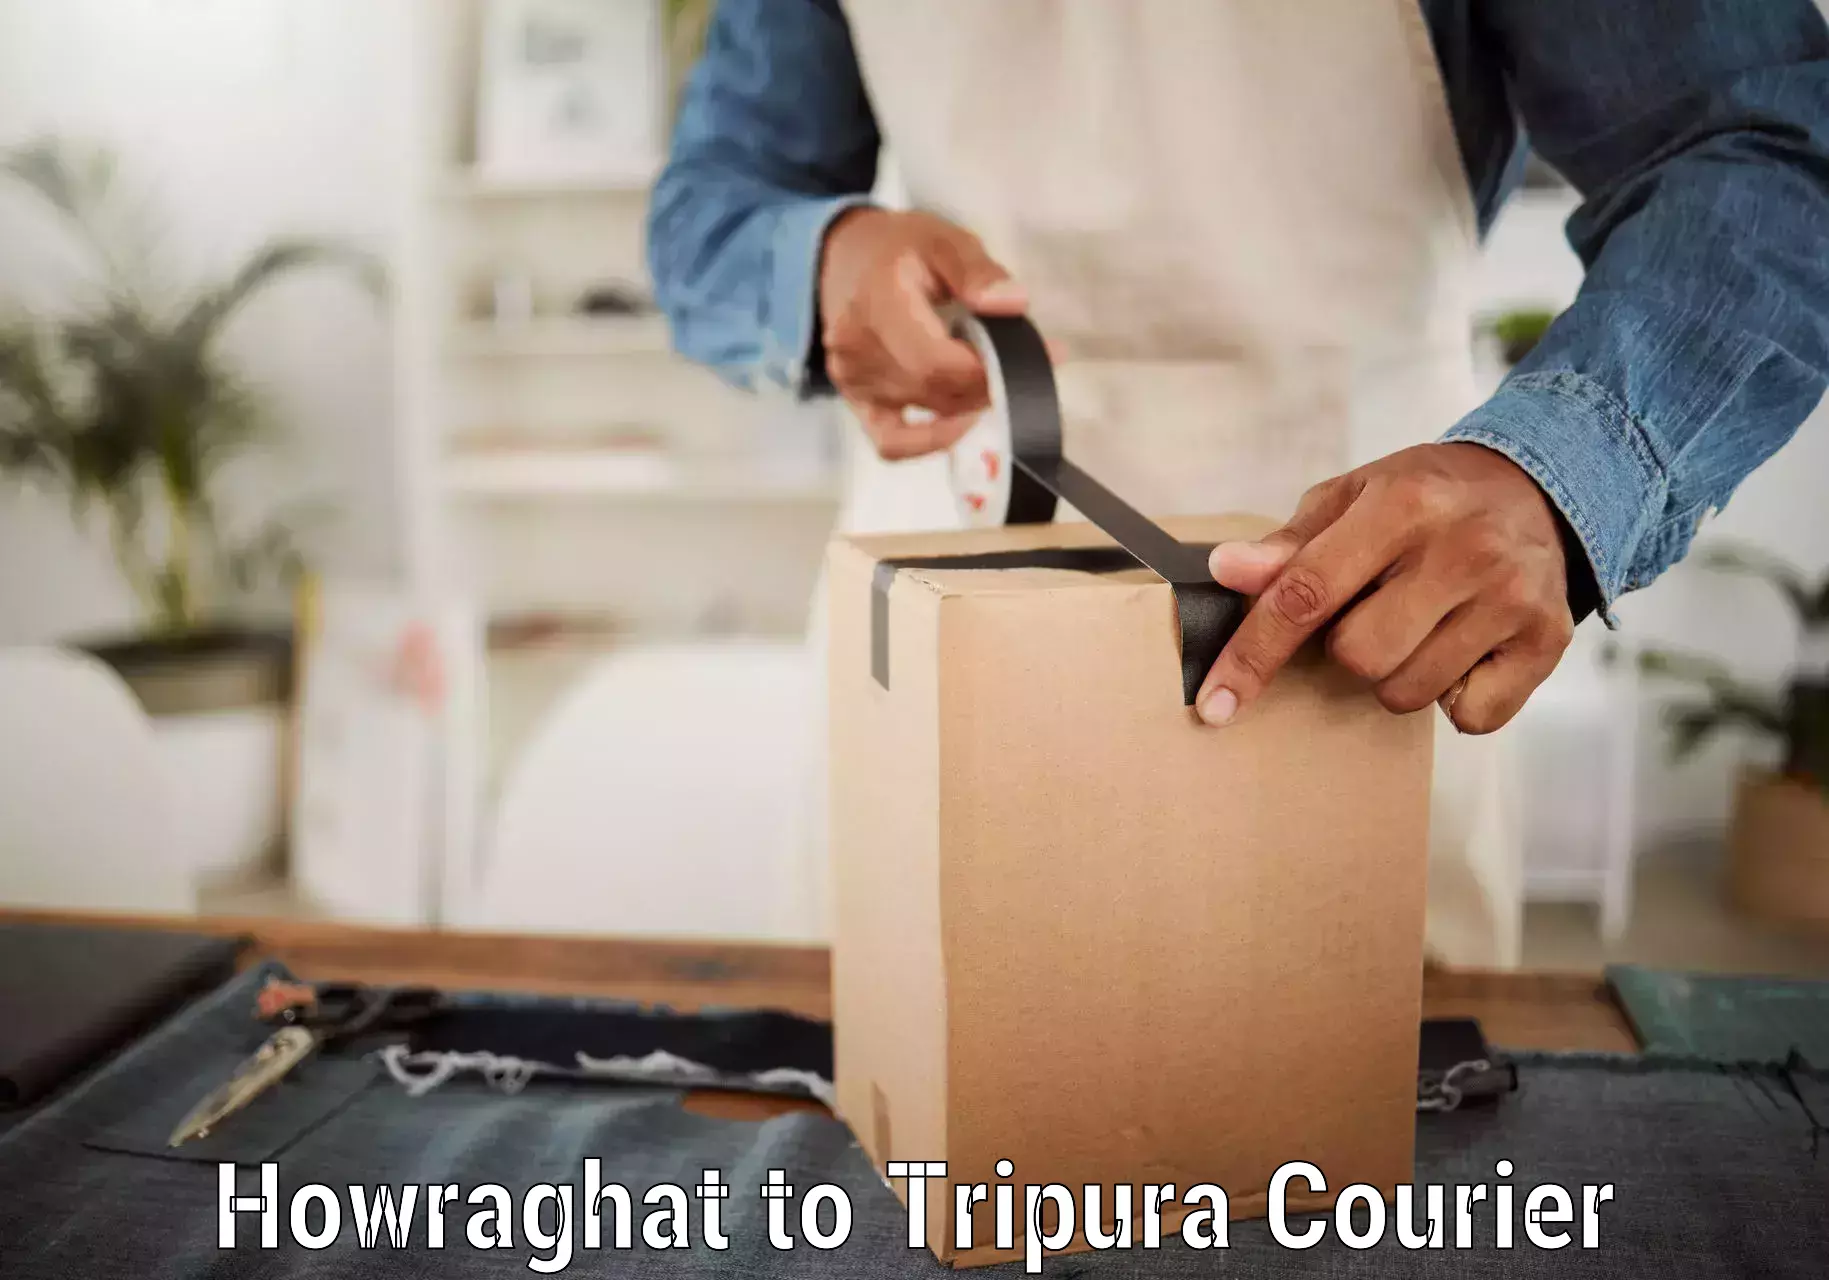 Advanced tracking systems Howraghat to Tripura